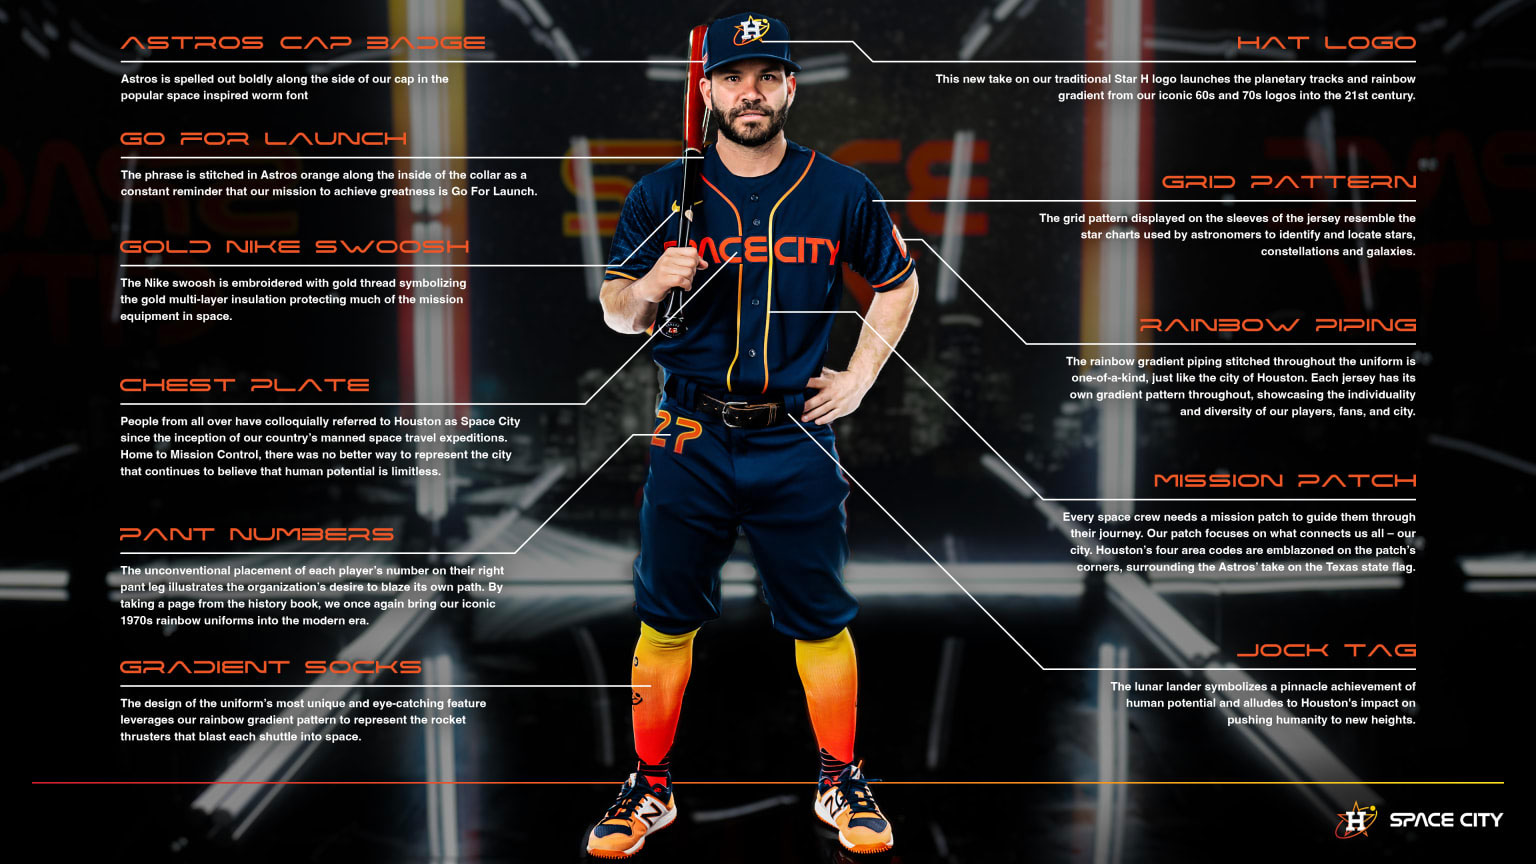 Astros' Sehgal on record-setting sales for Space City jerseys: 'The details  and storytelling within the uniform is what really makes it special